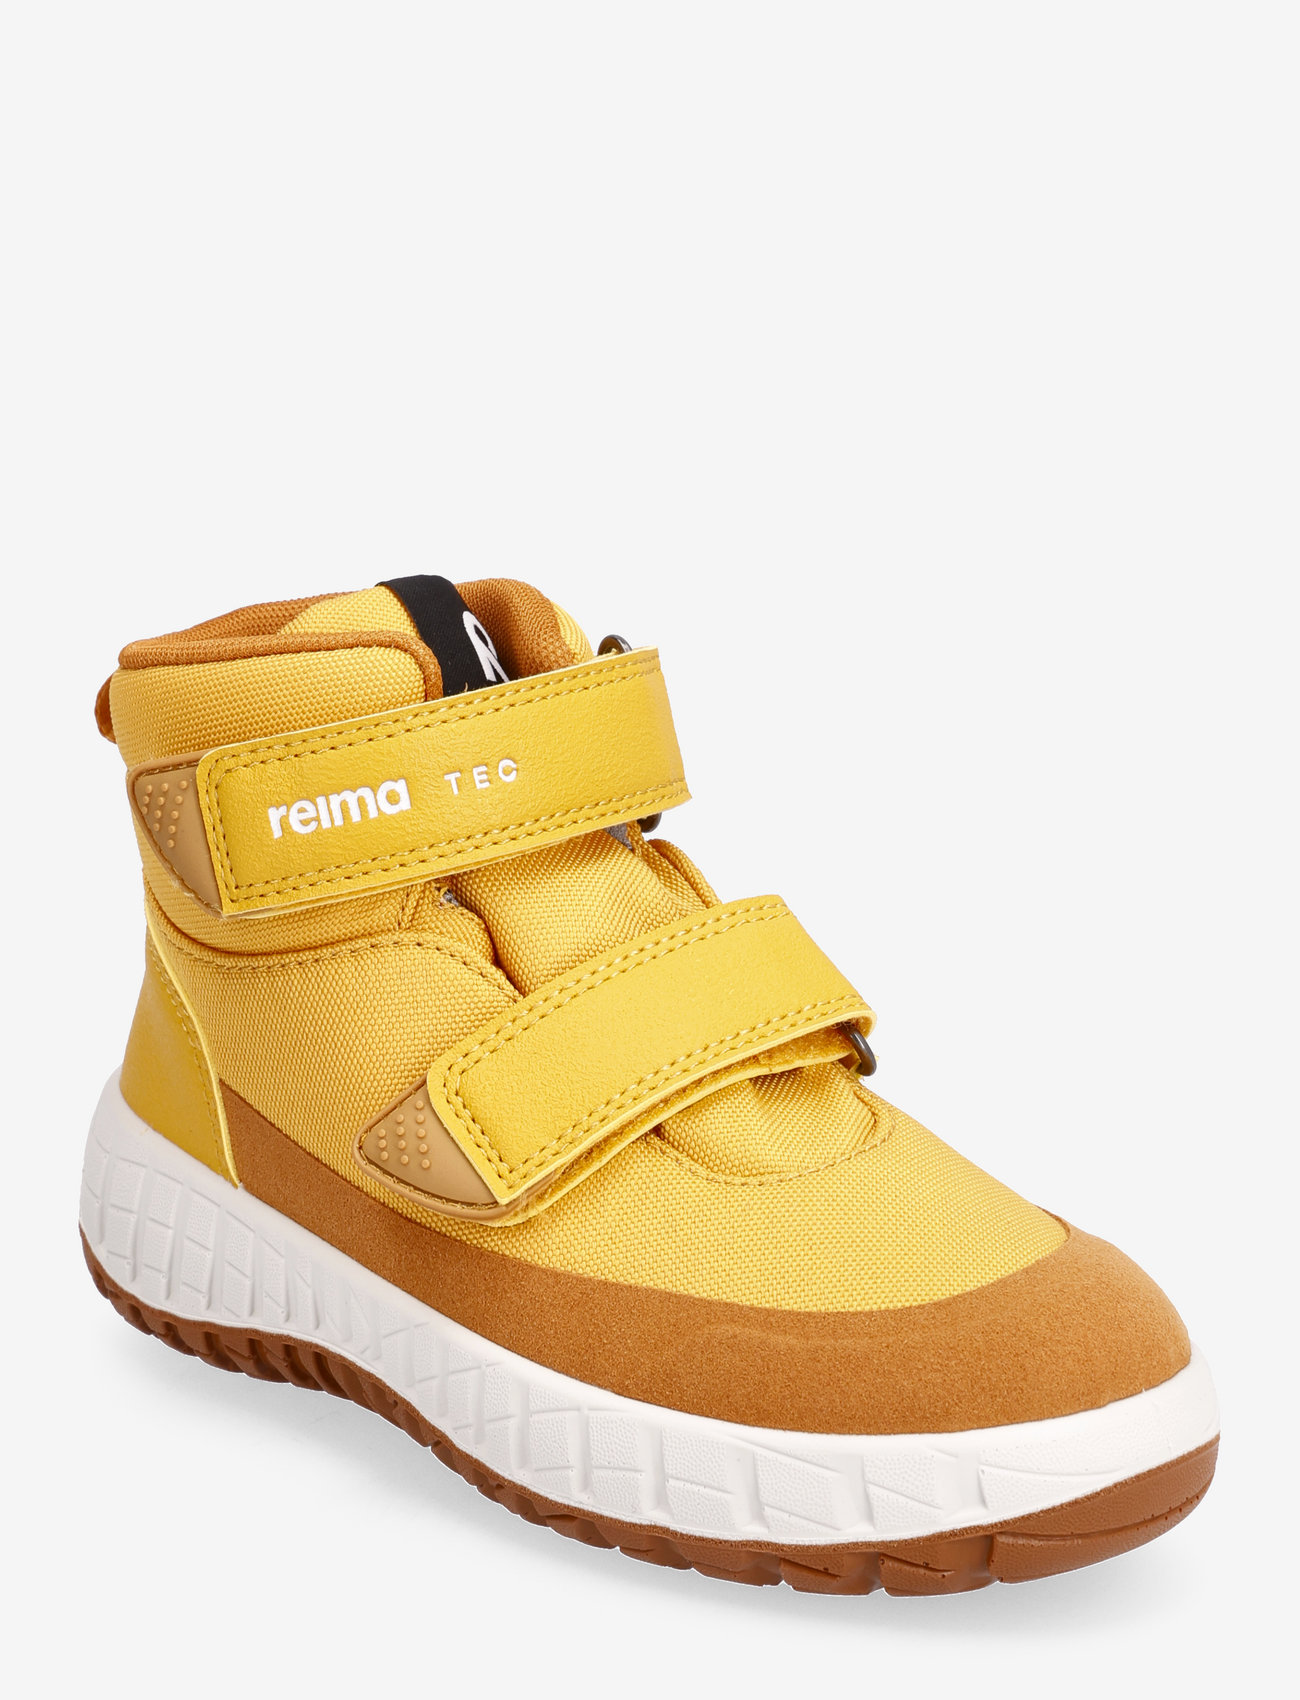 Reima - Reimatec shoes, Patter 2.0 - high tops - ochre yellow - 0